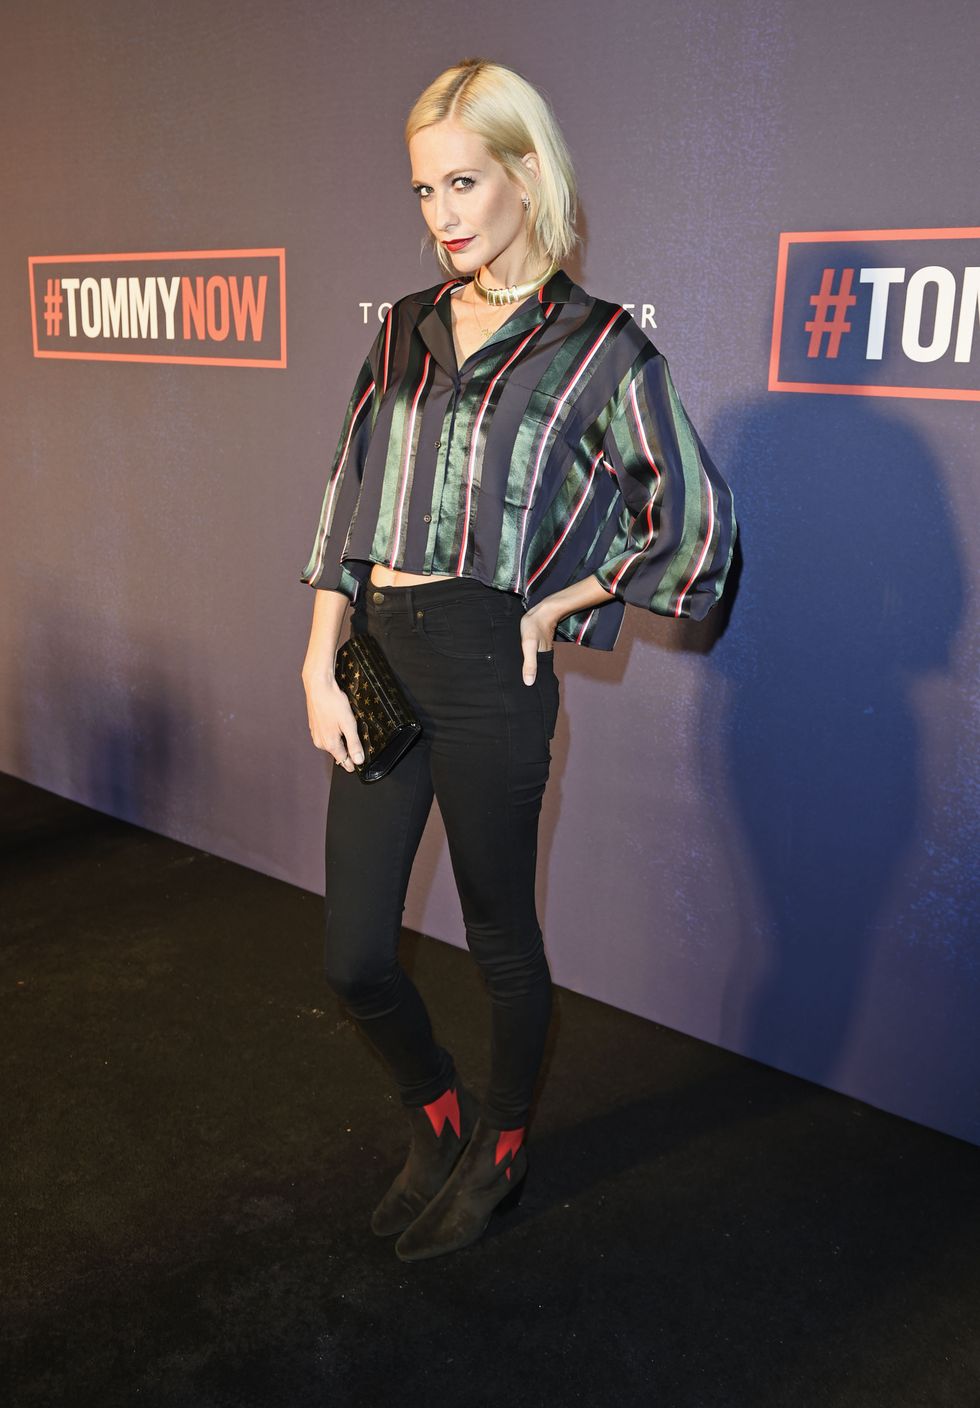 LONDON, ENGLAND - SEPTEMBER 19:  Poppy Delevingne attends the Tommy Hilfiger TOMMYNOW Fall 2017 Show during London Fashion Week September 2017 at The Roundhouse on September 19, 2017 in London, England.  (Photo by David M. Benett/Dave Benett/Getty Images for Tommy Hilfiger )